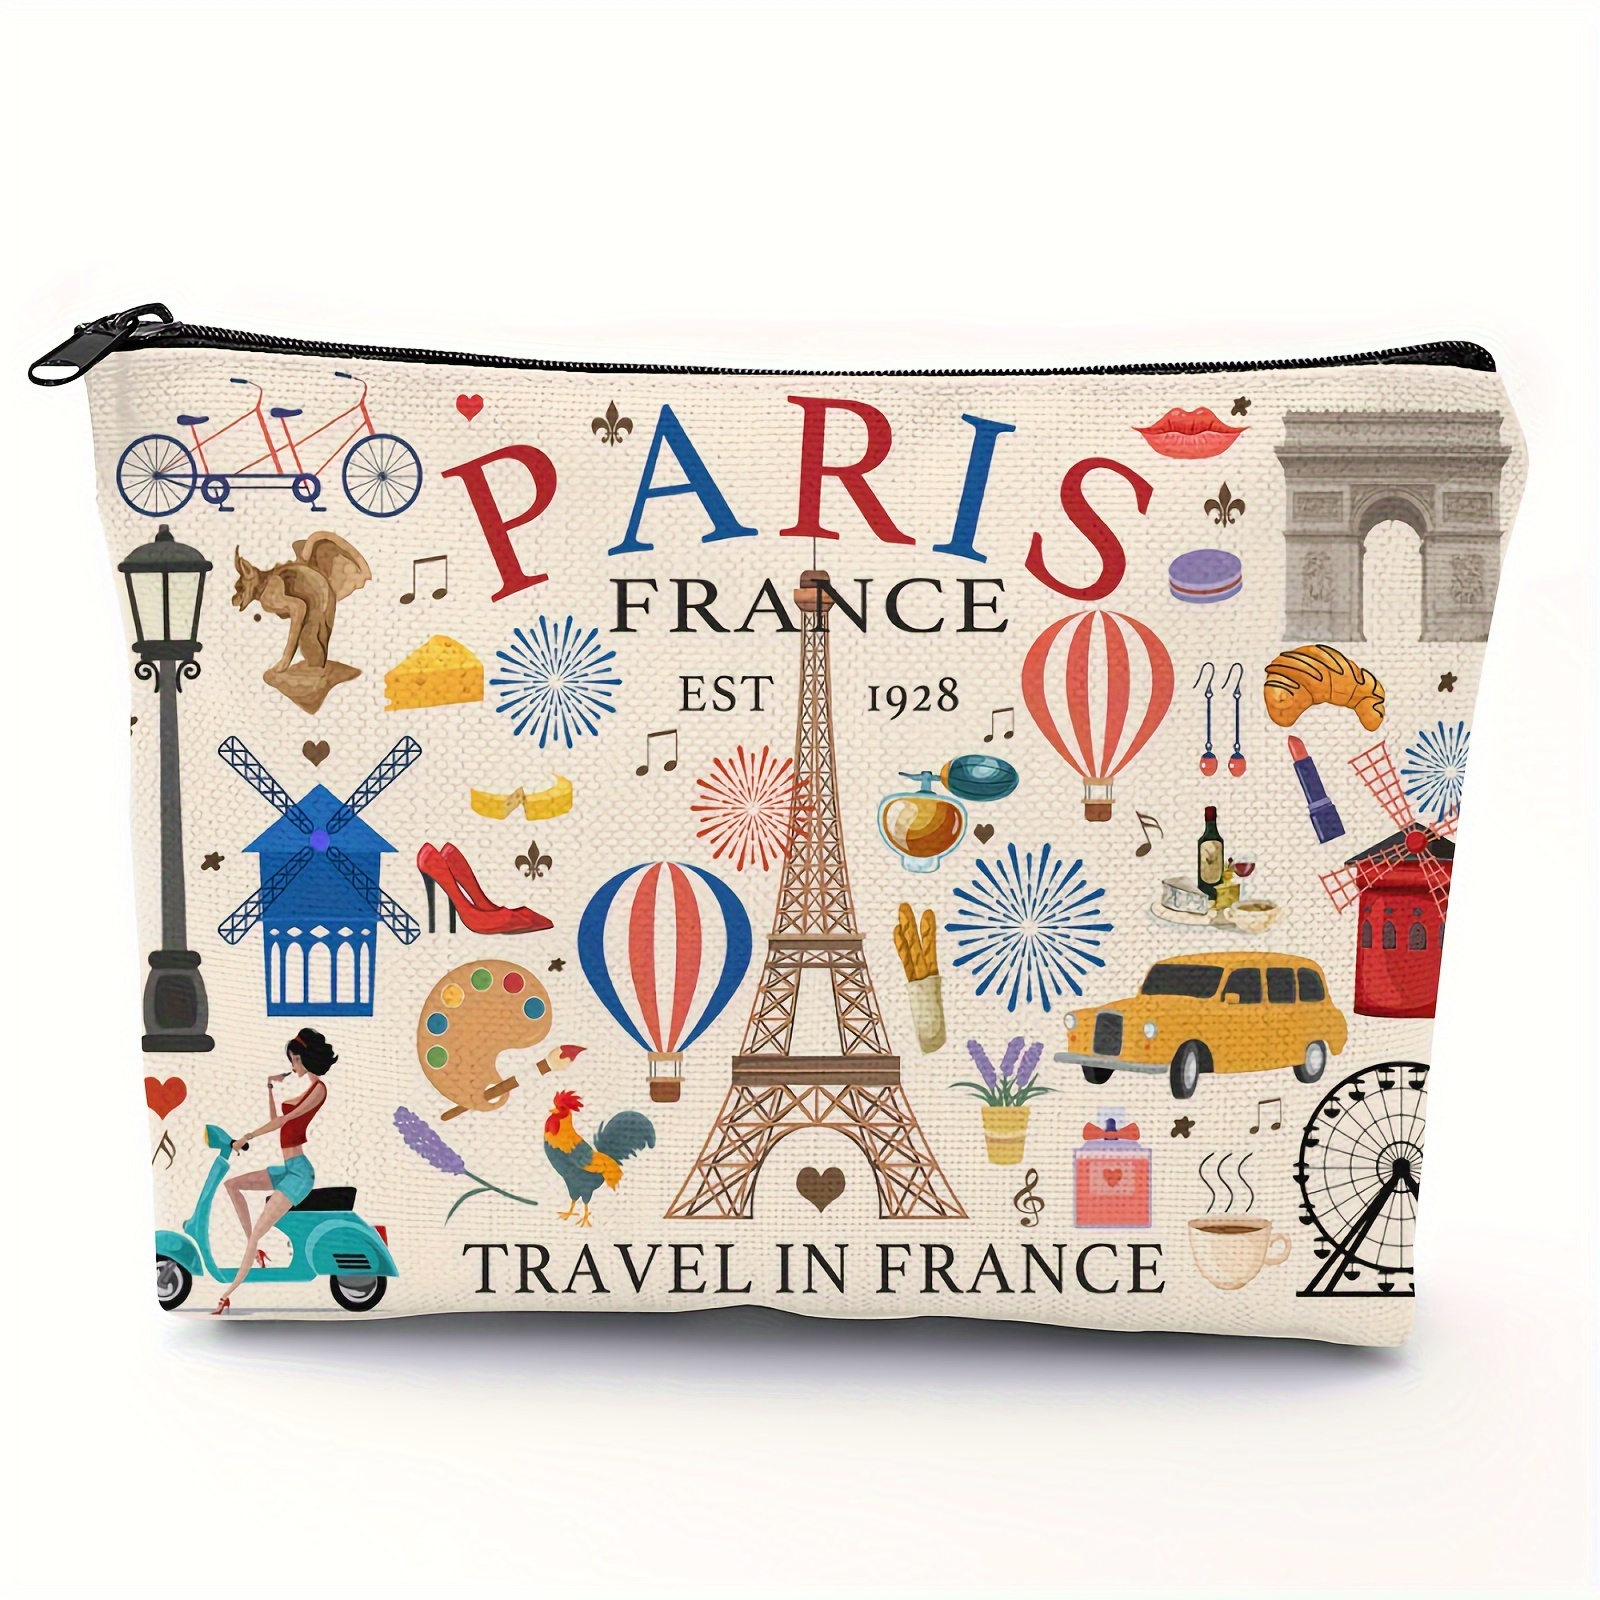 

Funny Paris Travel Gifts For Women Makeup Bag France Birthday Mothers Day Anniversary Cosmetic Bag Travel Toiletry Bag Travel Essentials Friendship Gifts For Girls Sister Travelers